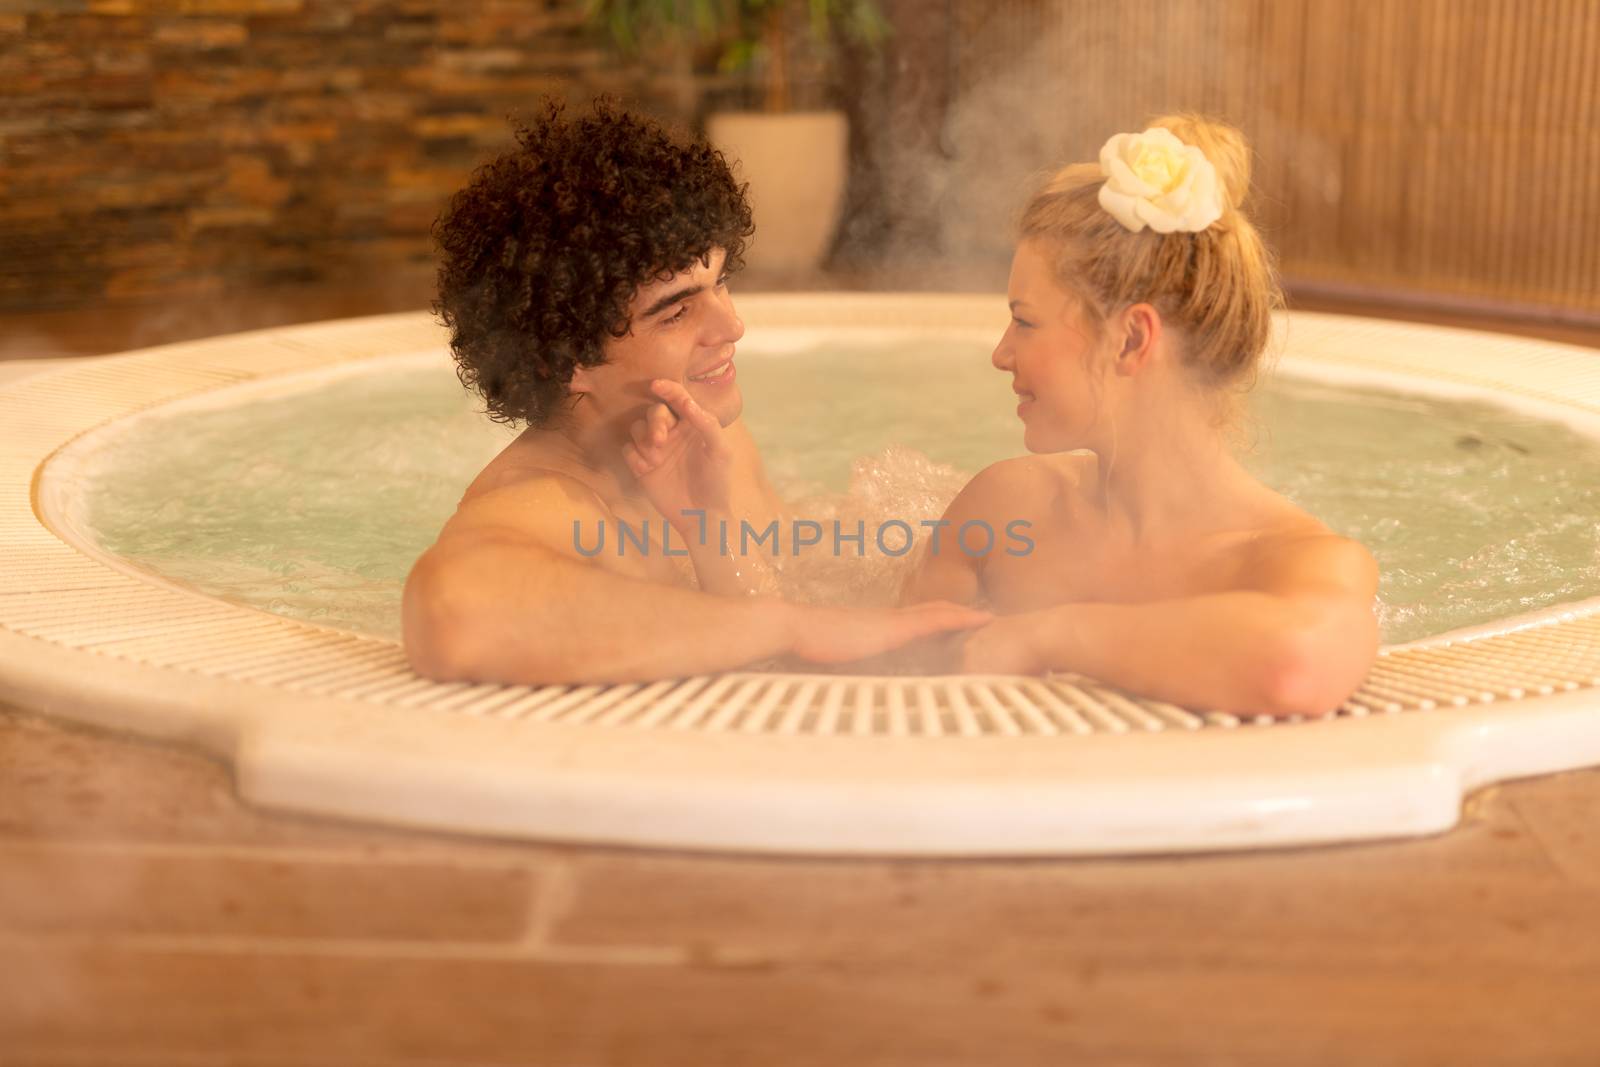 Couple At The Spa by MilanMarkovic78